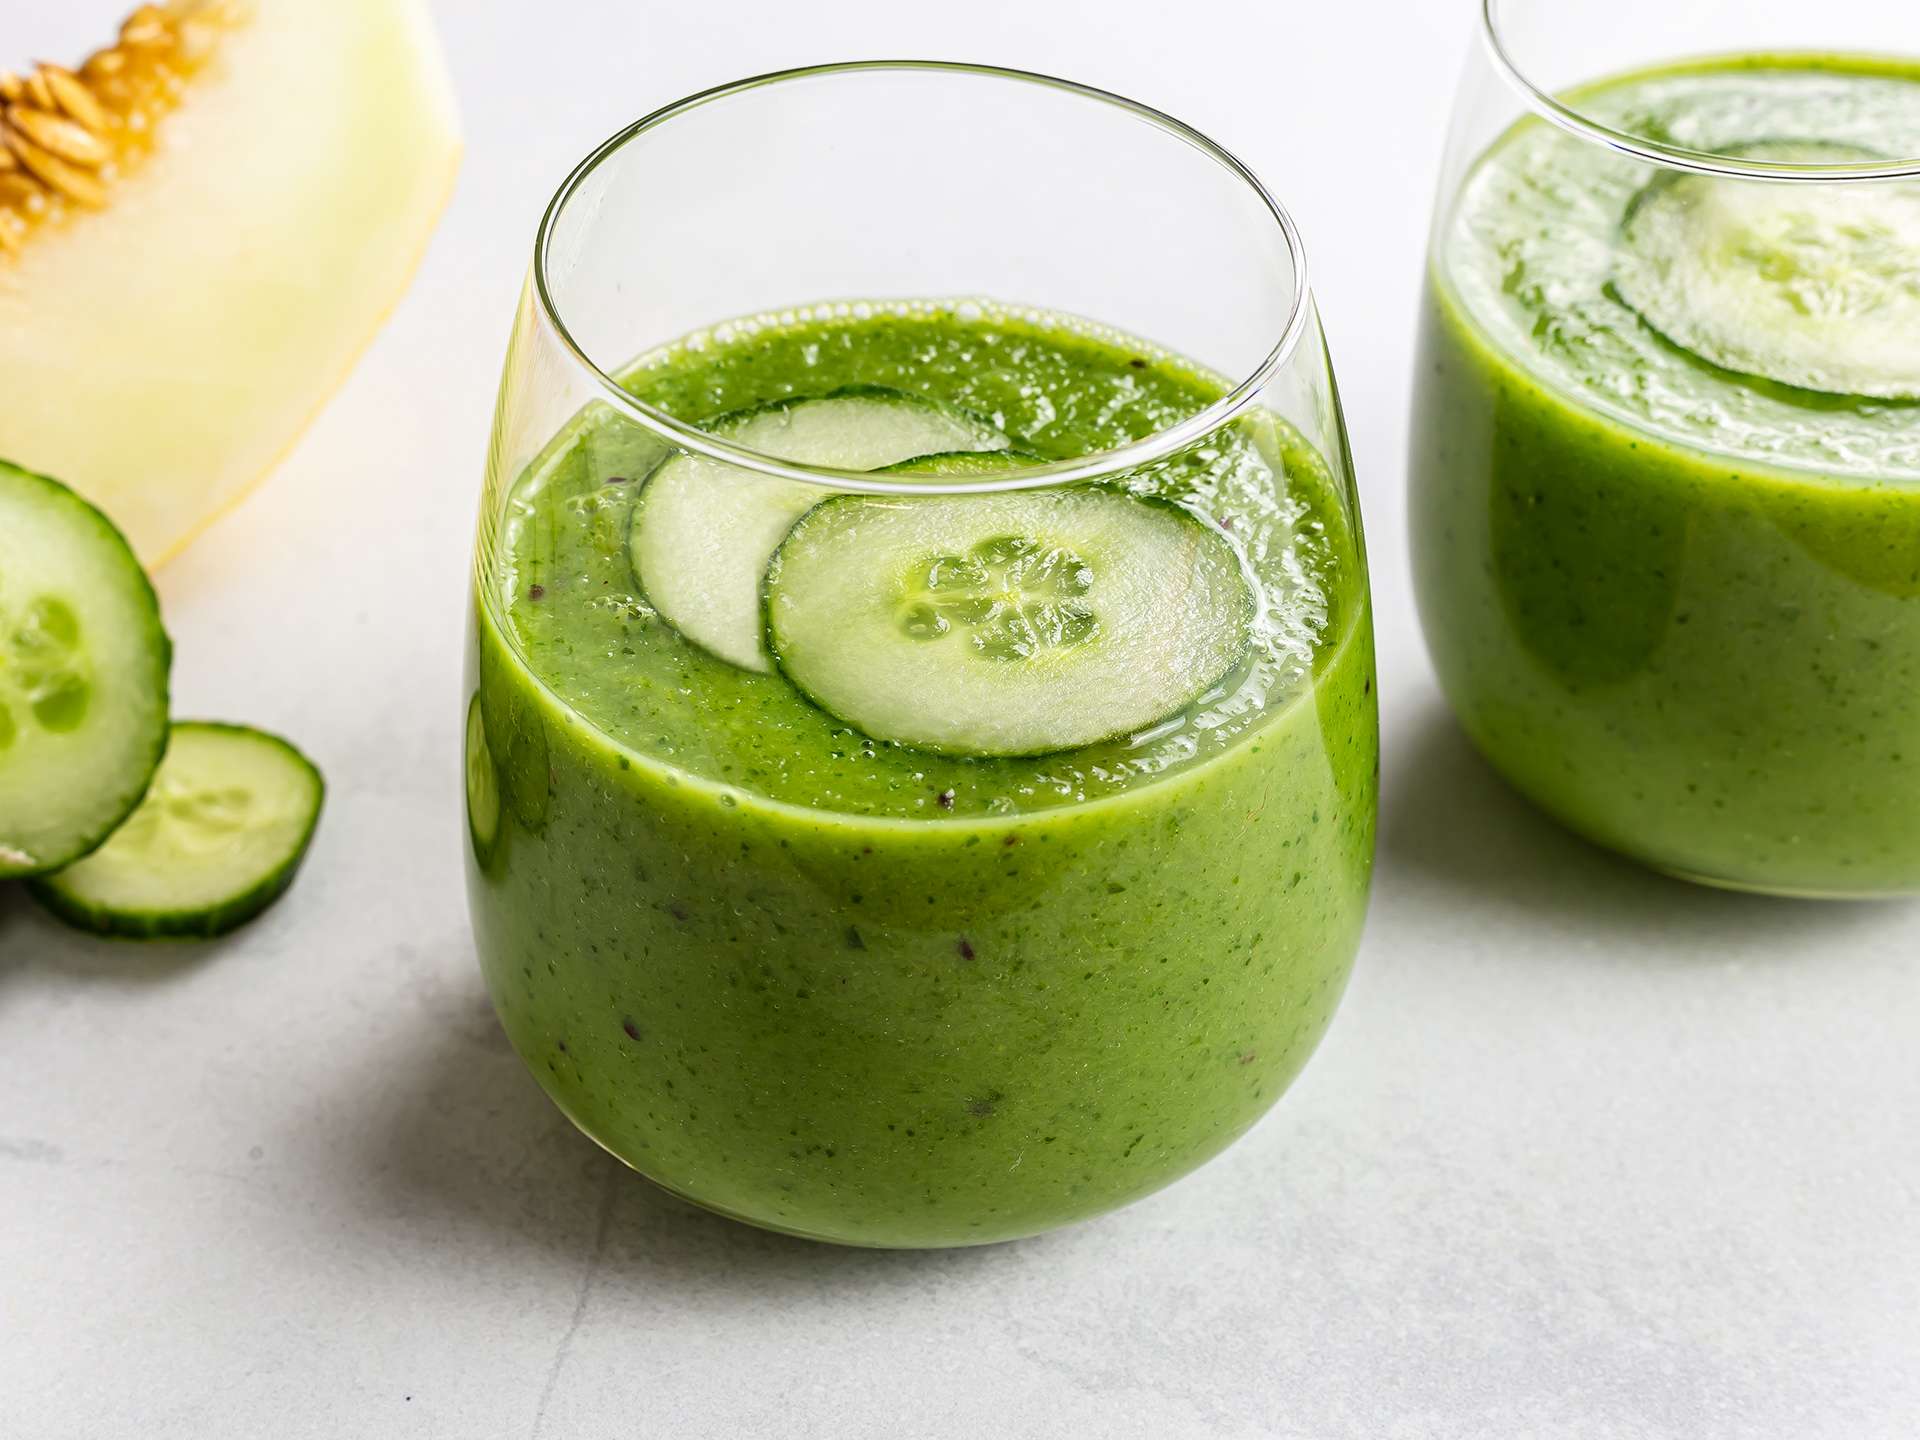 healthy drinks to make at home